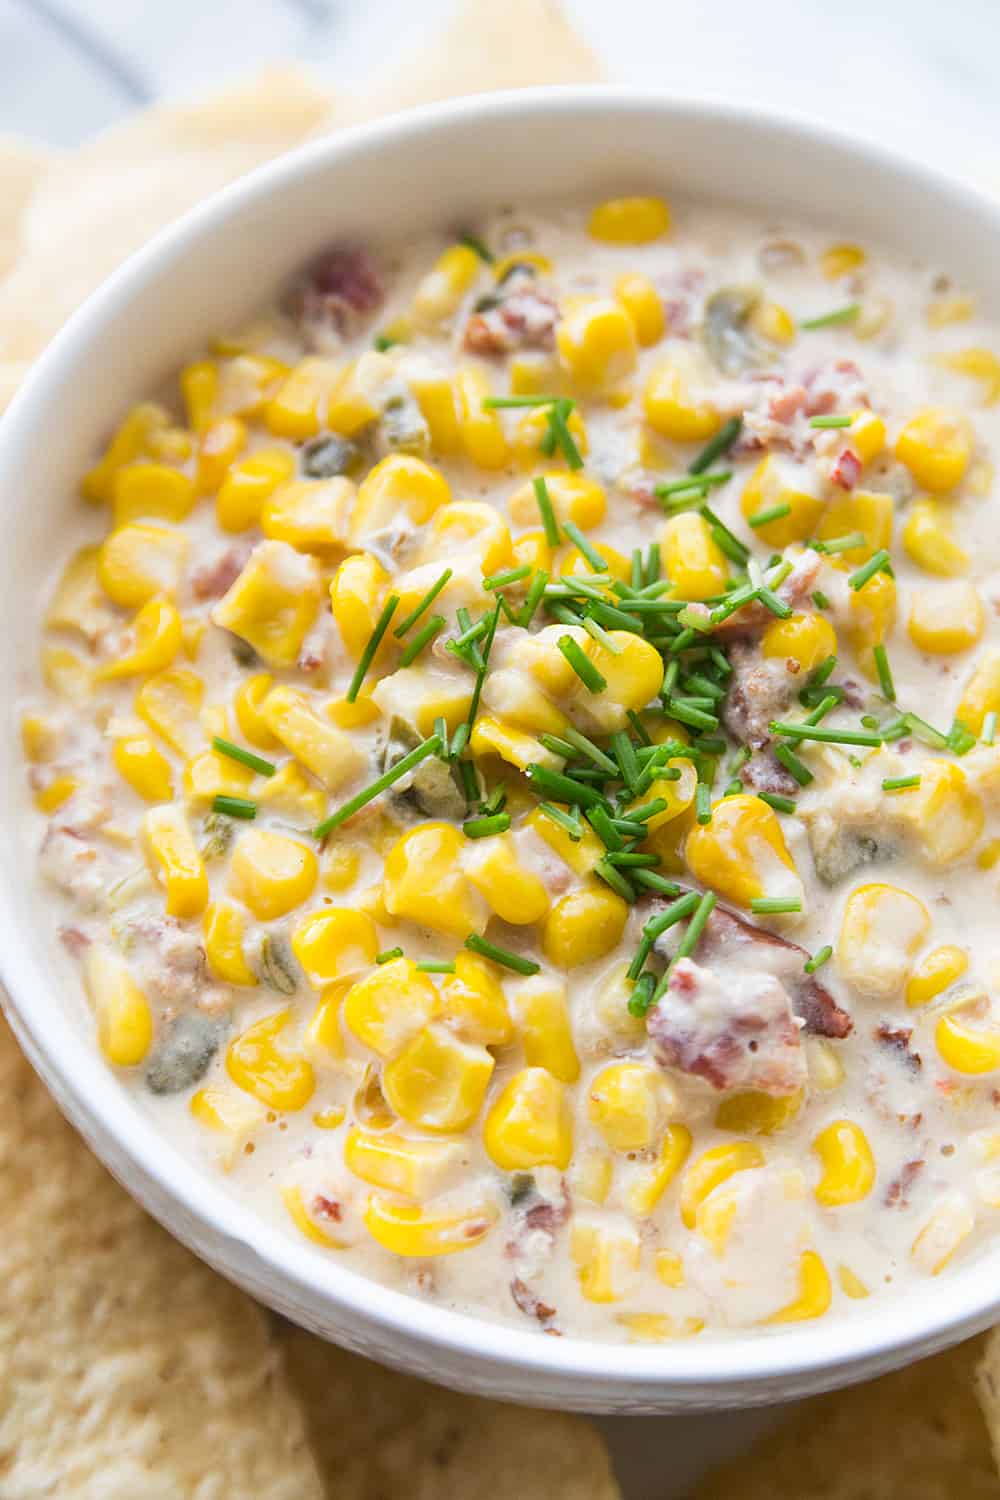 Slow Cooker Cheesy Hot Corn Dip - Looking for a game day appetizer that will have family, friends, and fans cheering? Serve a slow cooker full of this cheesy hot corn dip! #appetizer #slowcooker #crockpot #recipe #corndip #hotcorndip #halfscratched #slowcookerrecipe #crockpotrecipe #appetizerrecipe